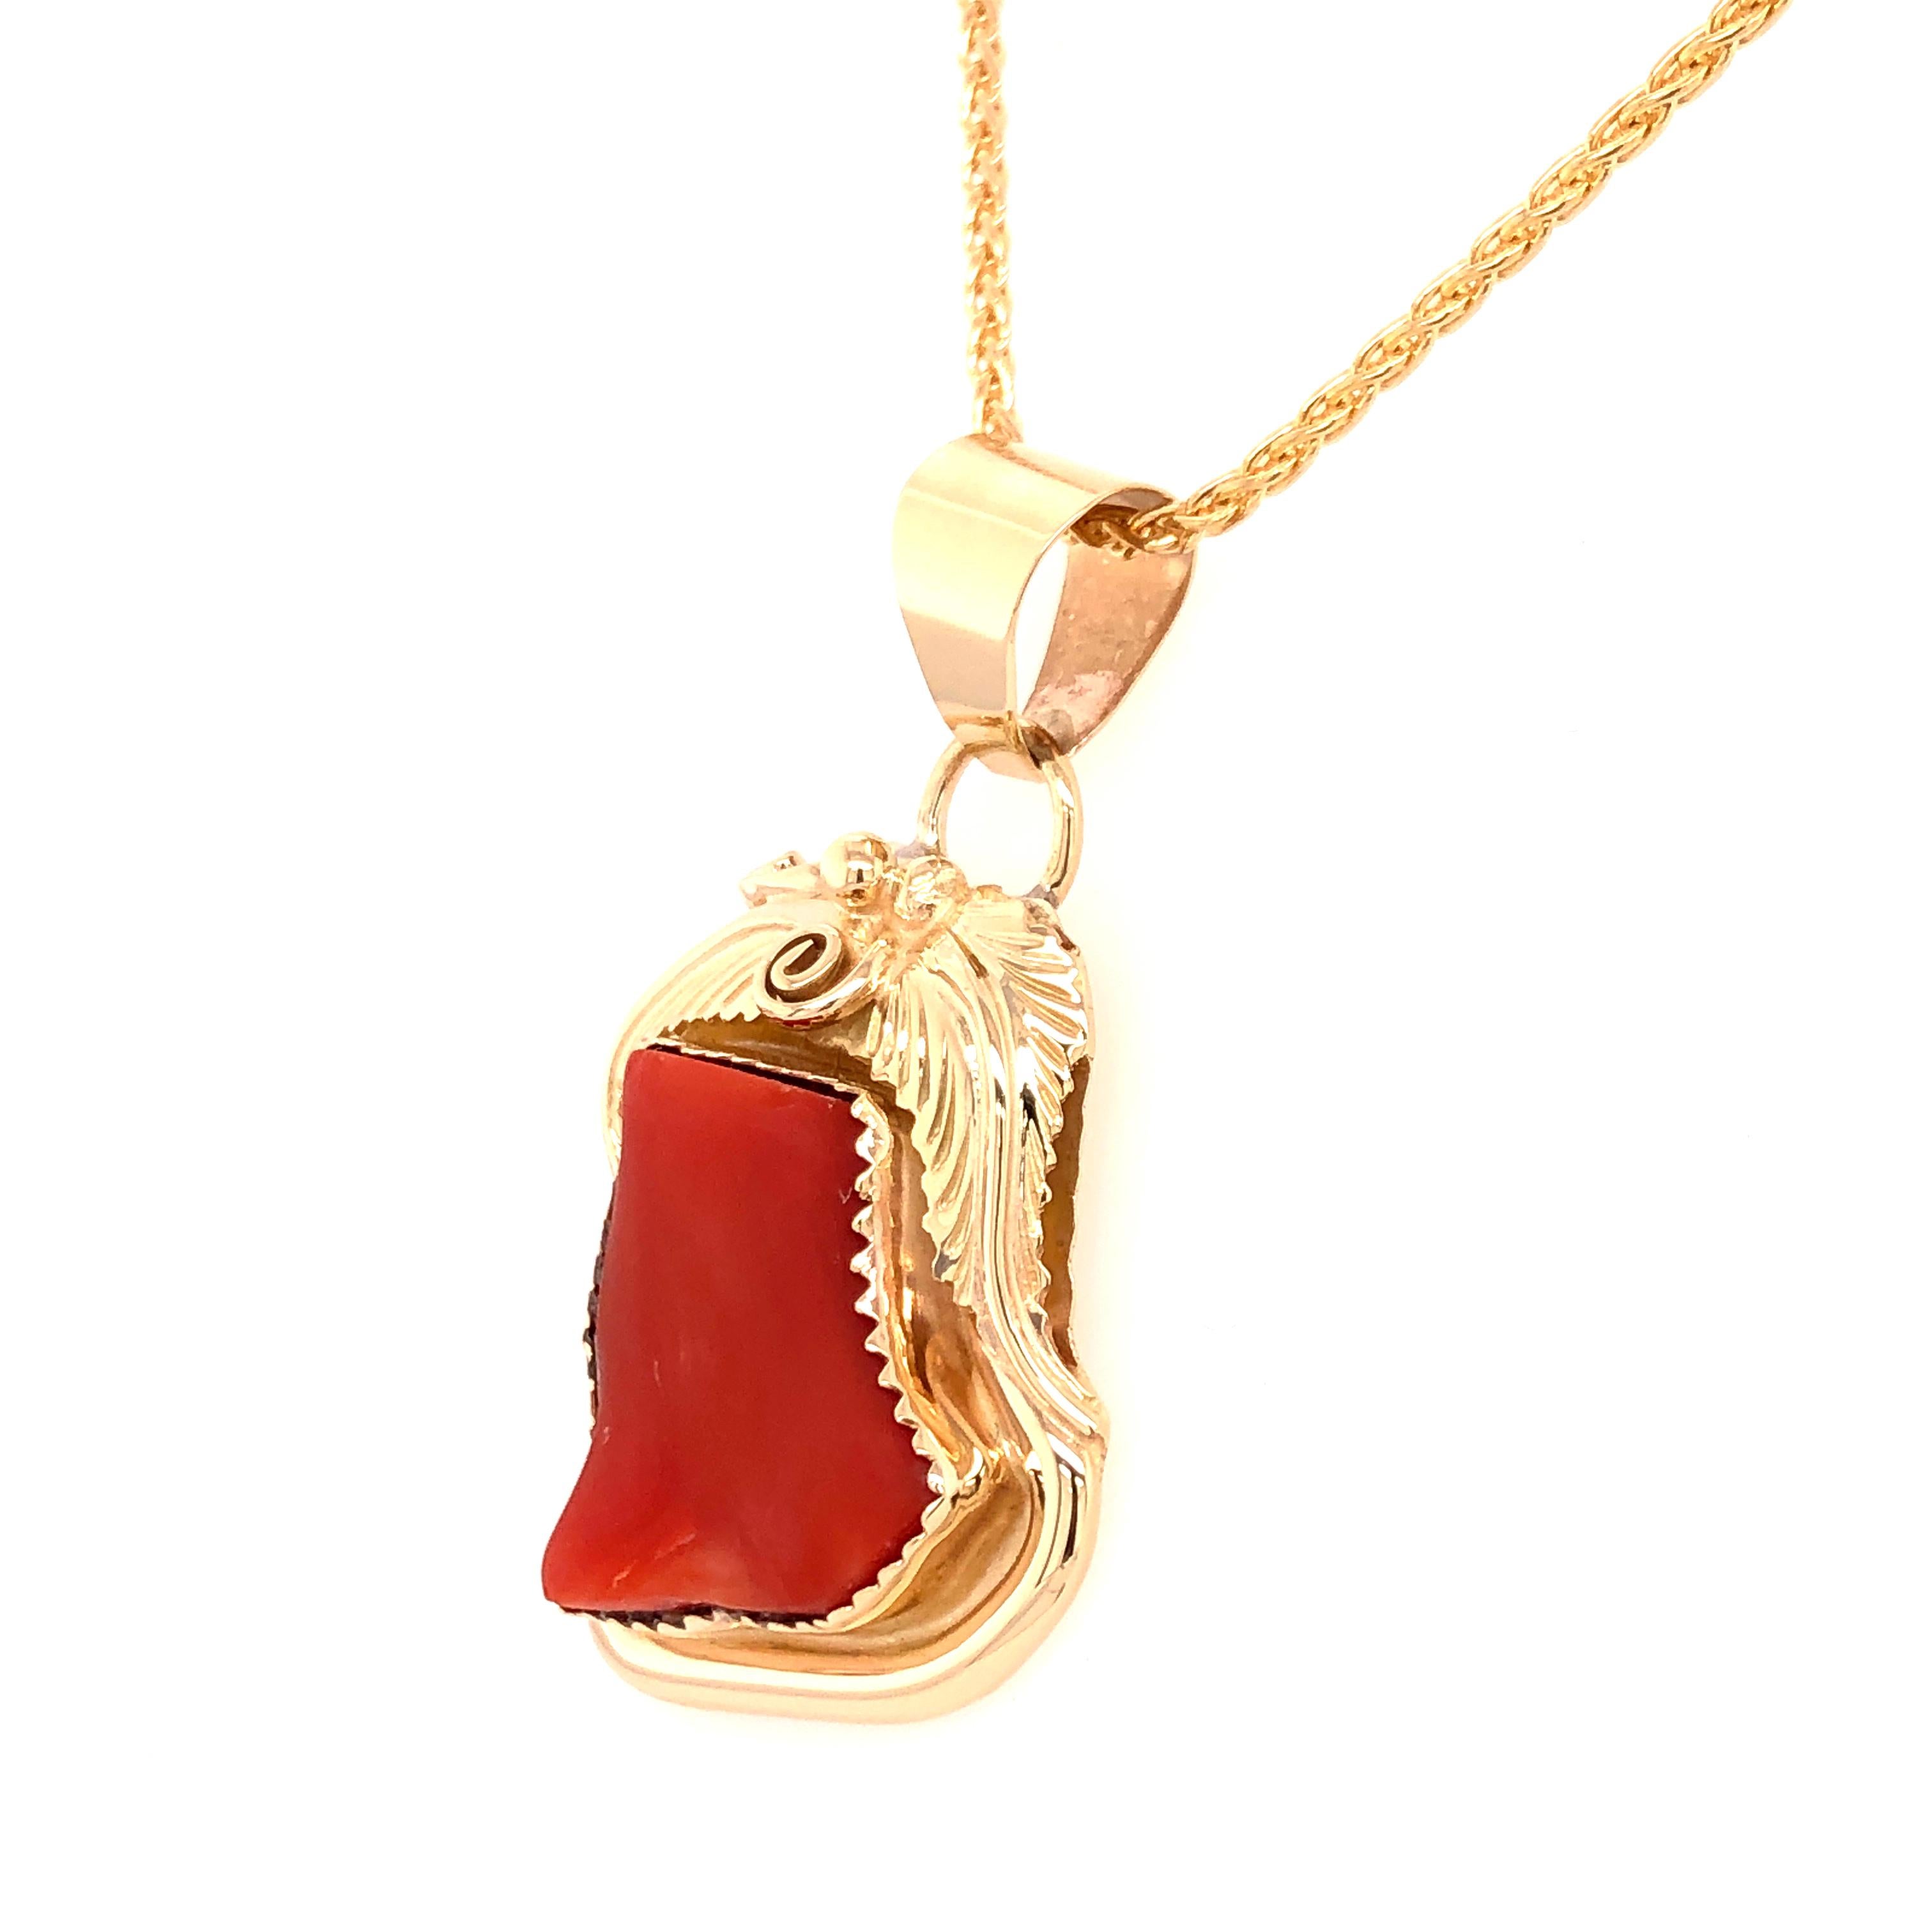 A perfect gift for your Boho chic heart. The design of this pendant is based on the organic shape of the bezel set red coral. The floral motif of the 14K yellow gold further defines the natural design. 

The pendant rests on a 17.5